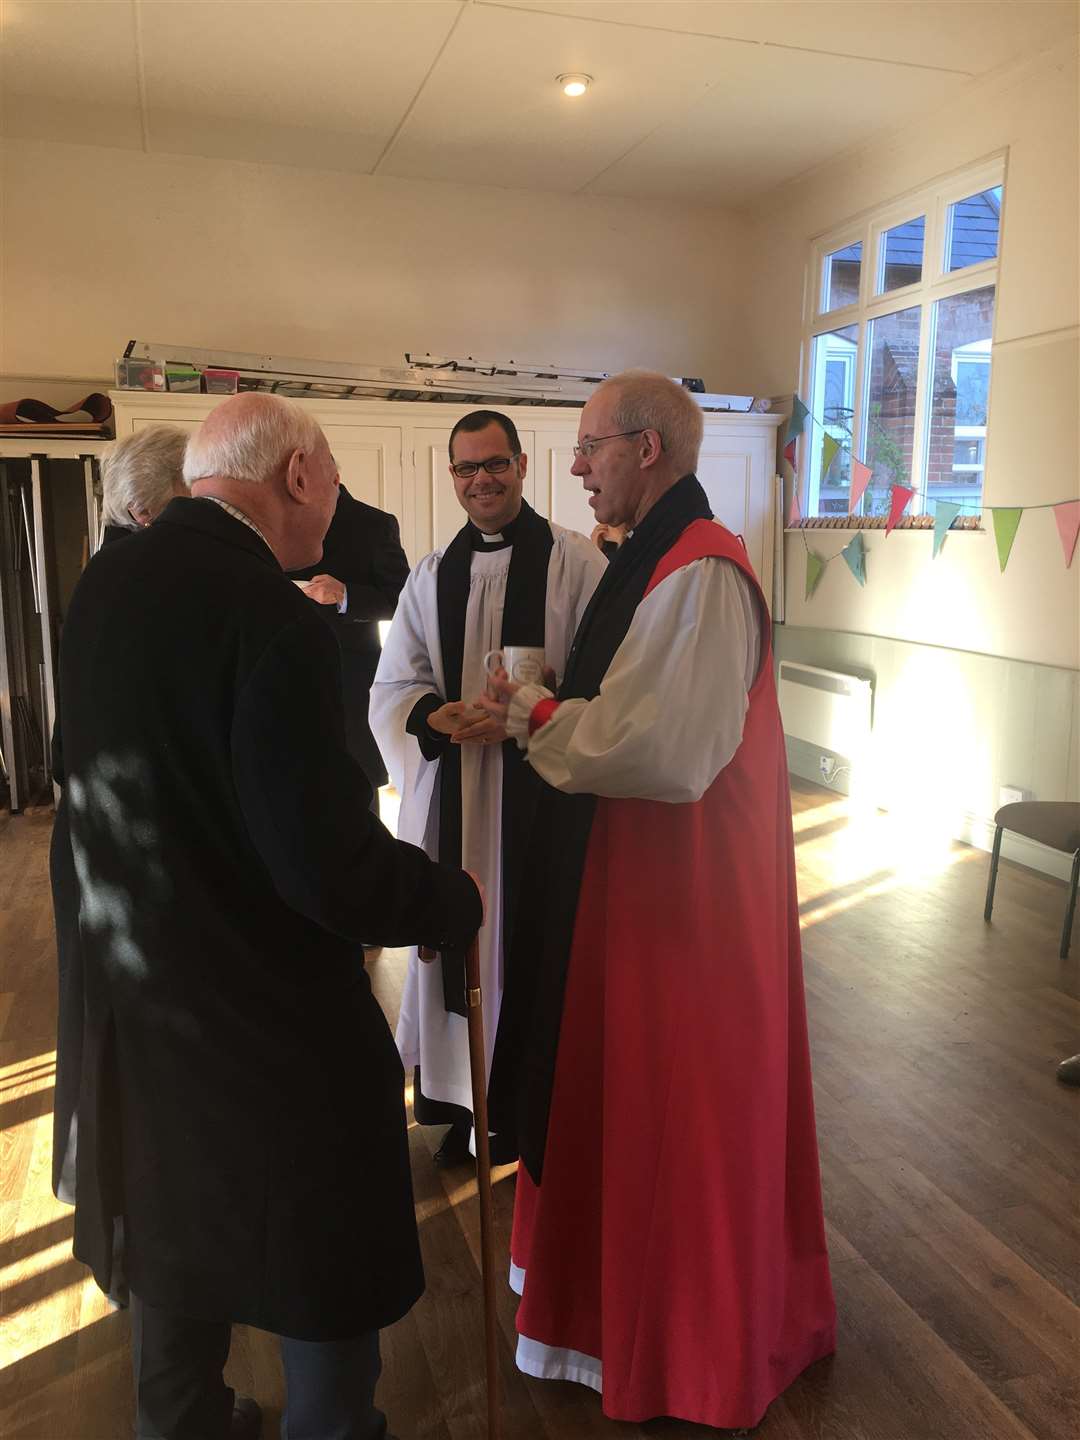 The Archbishop stayed after the services to get to know the community and the parishes. Picture: Rev'd Peter Deaves